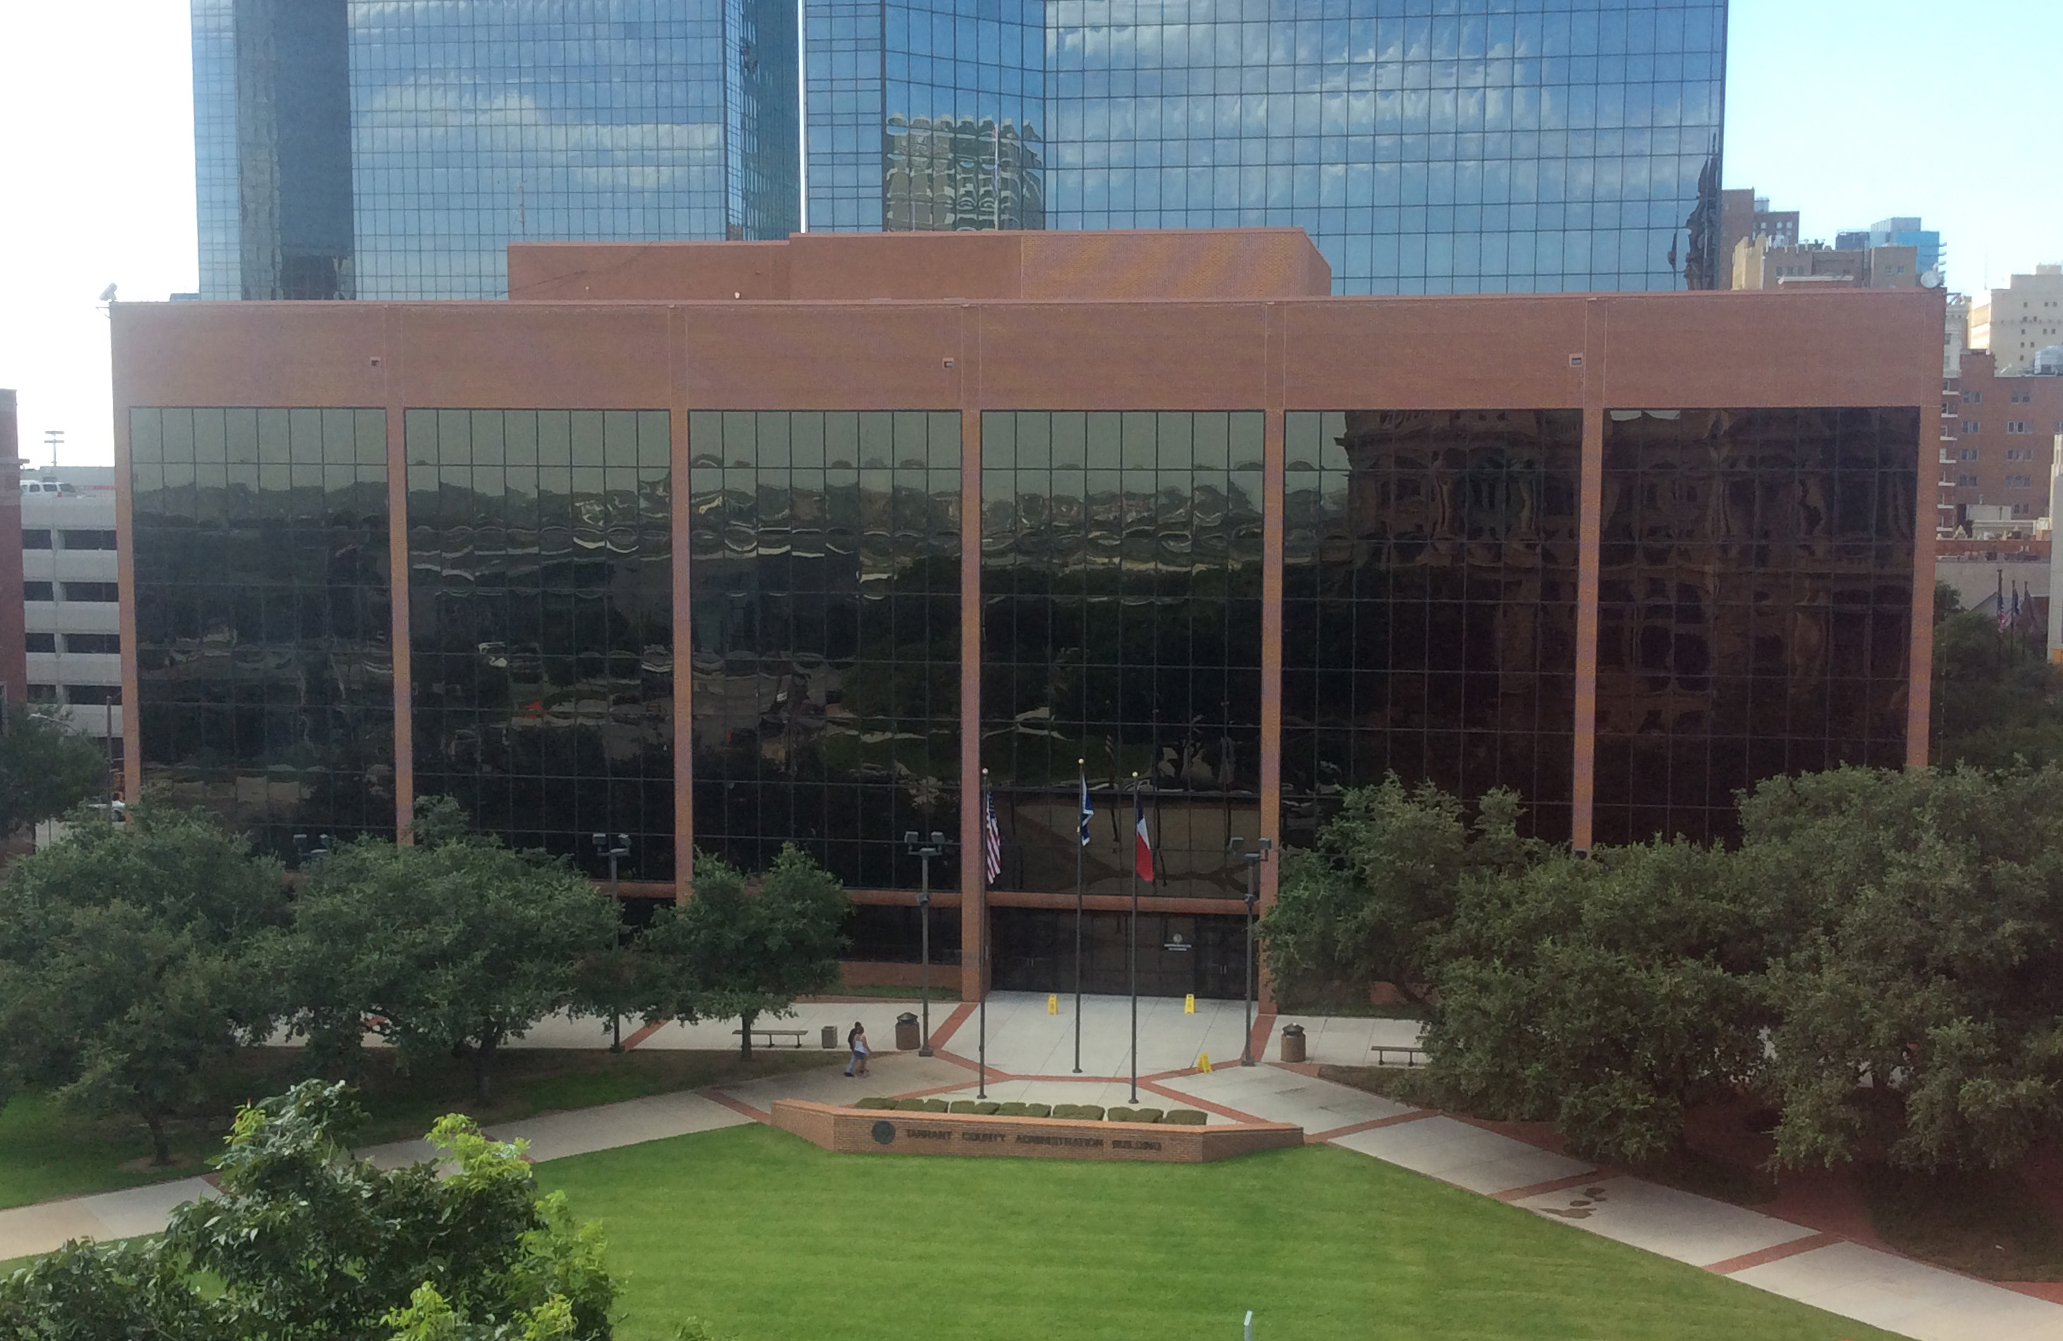 Tarrant County Administration Building